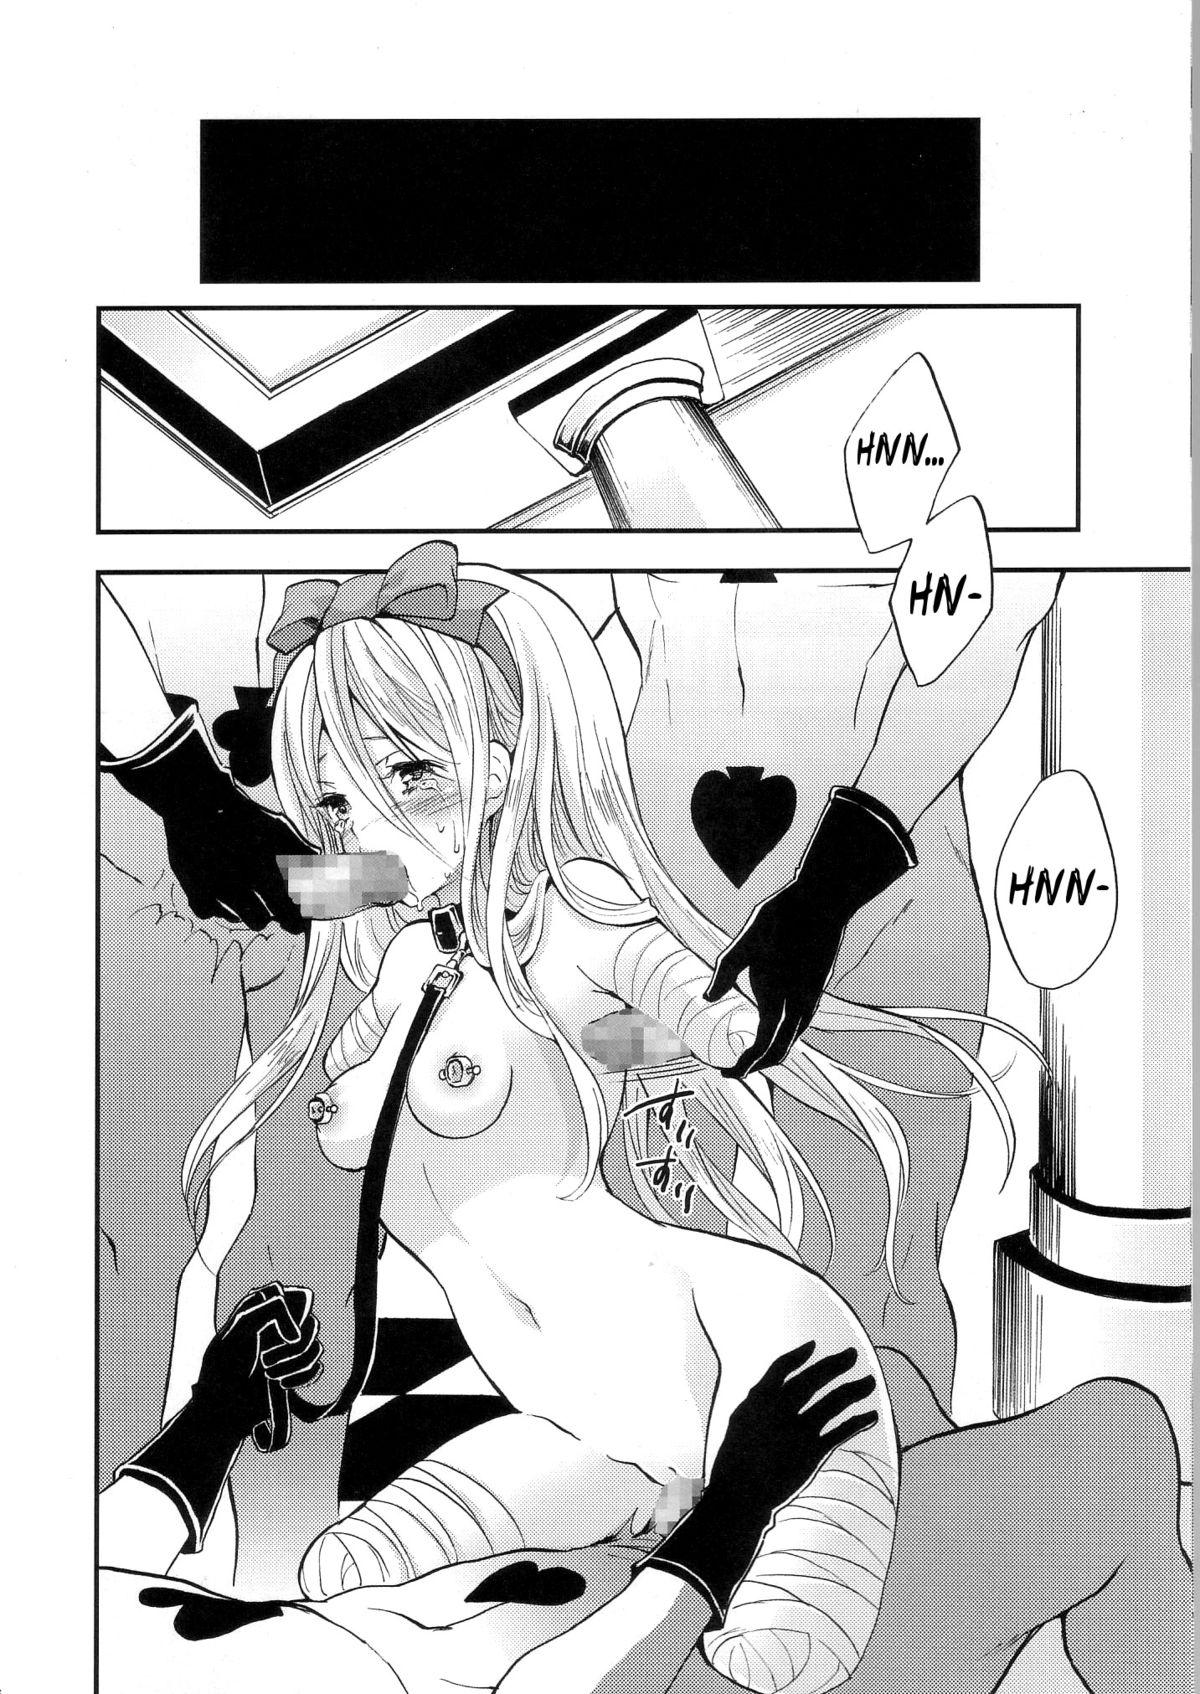 labyrinth Page 15 Of 19 alice in wonderland uncensored hentai, labyrinth Pa...